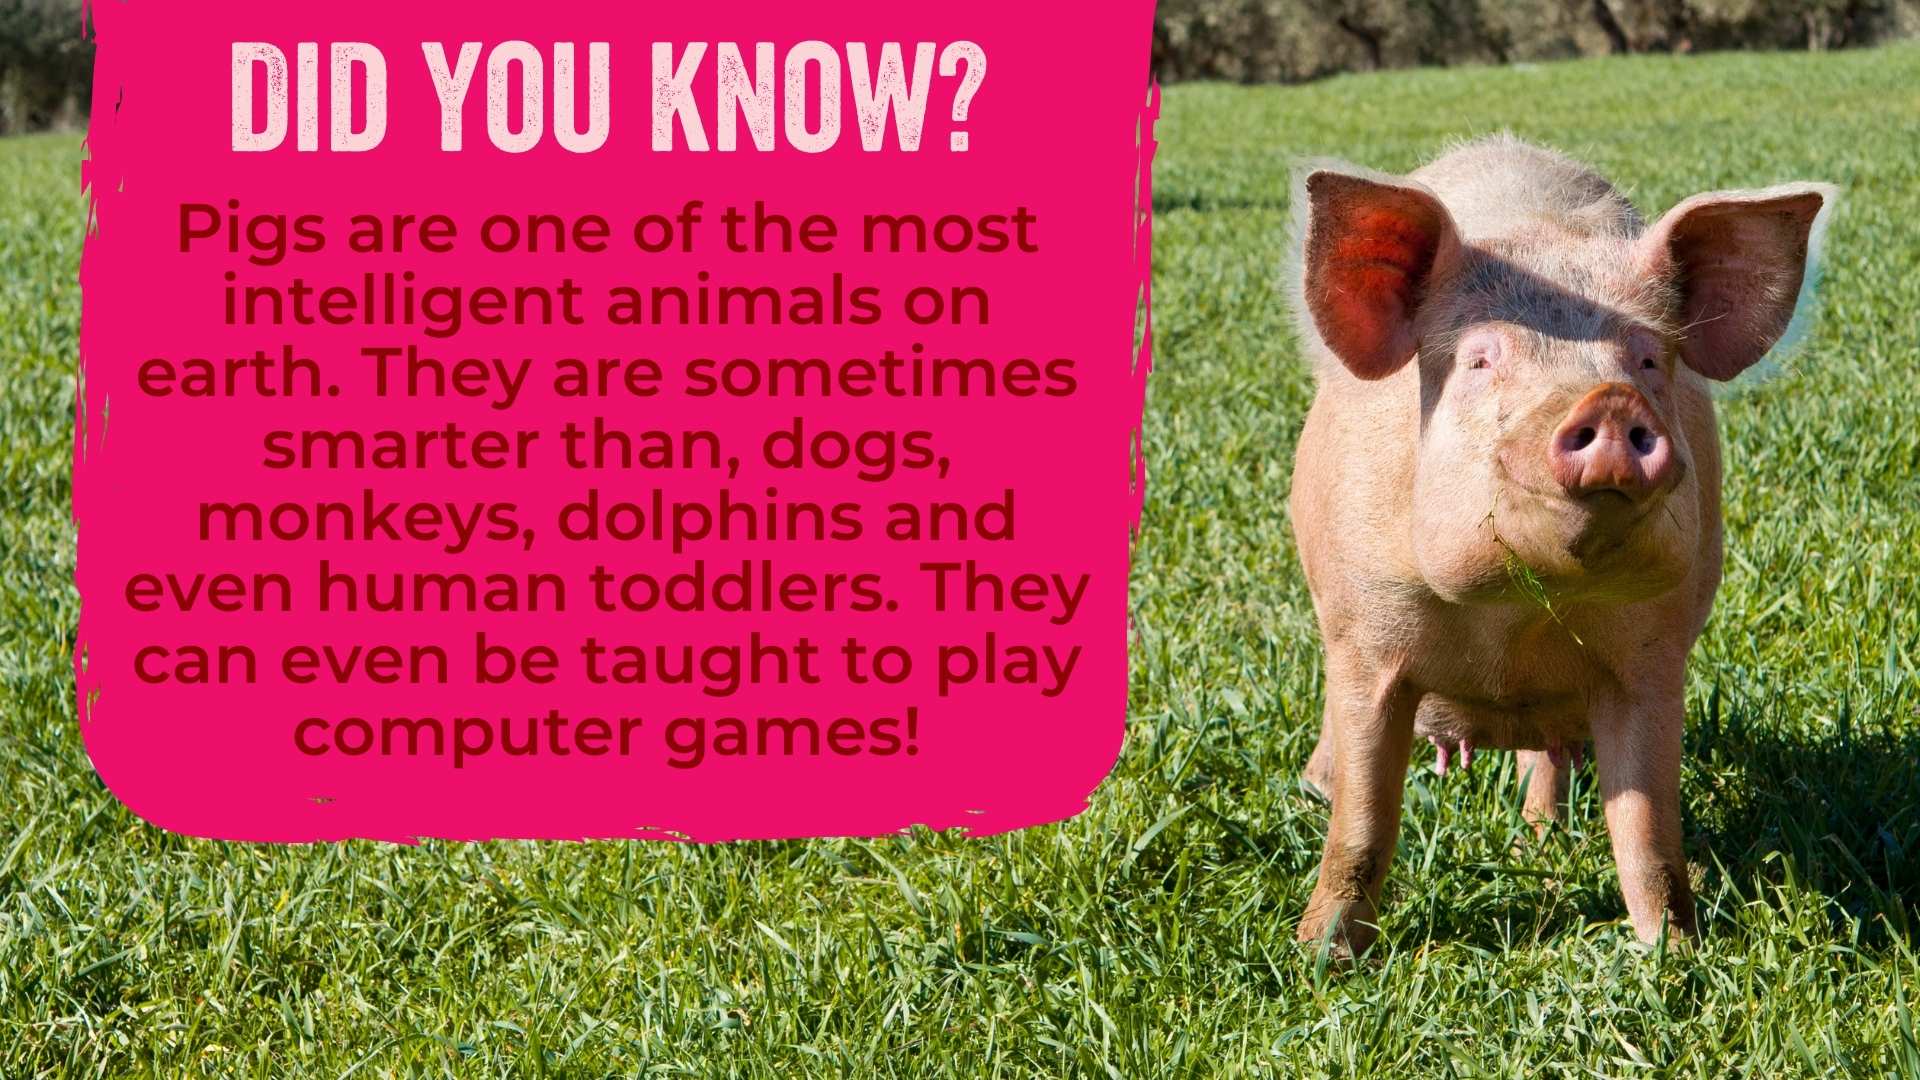 Pigs are one of the most intelligent animals on earth. They are sometimes smarter than, dogs, monkeys, dolphins and even human toddlers. They can even be taught to play computer games!